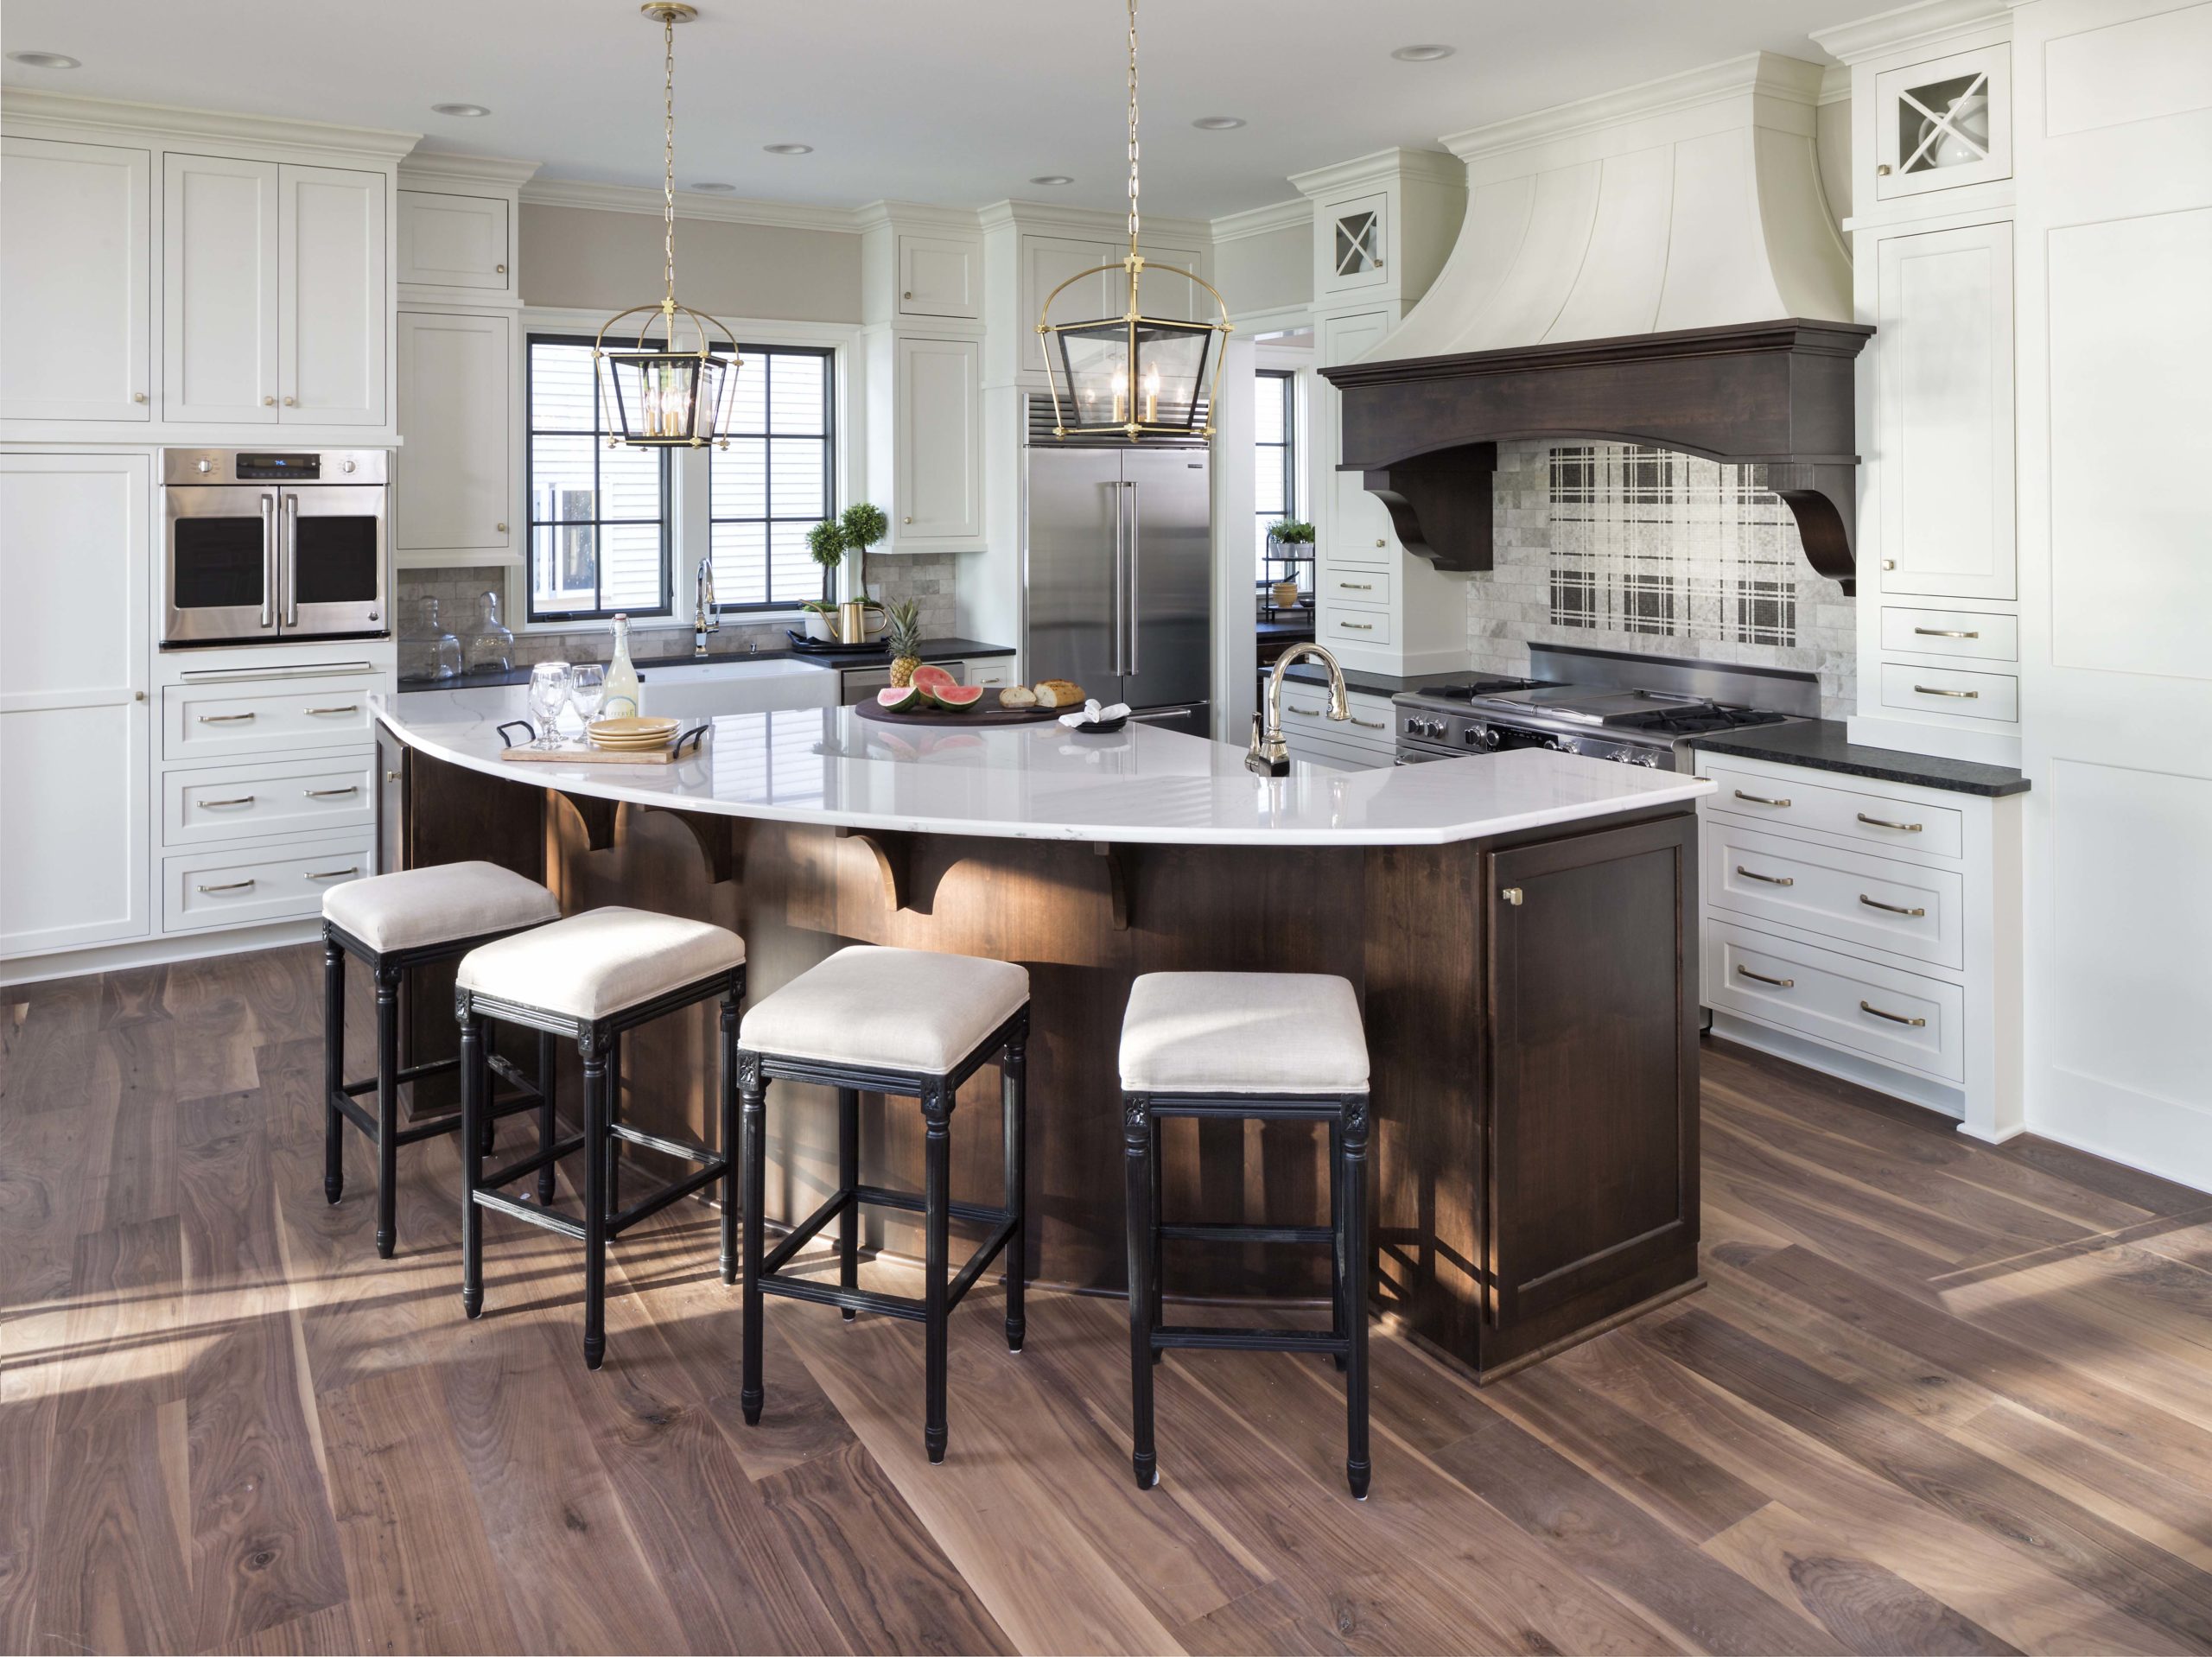 A large kitchen with a center island and bar stools.